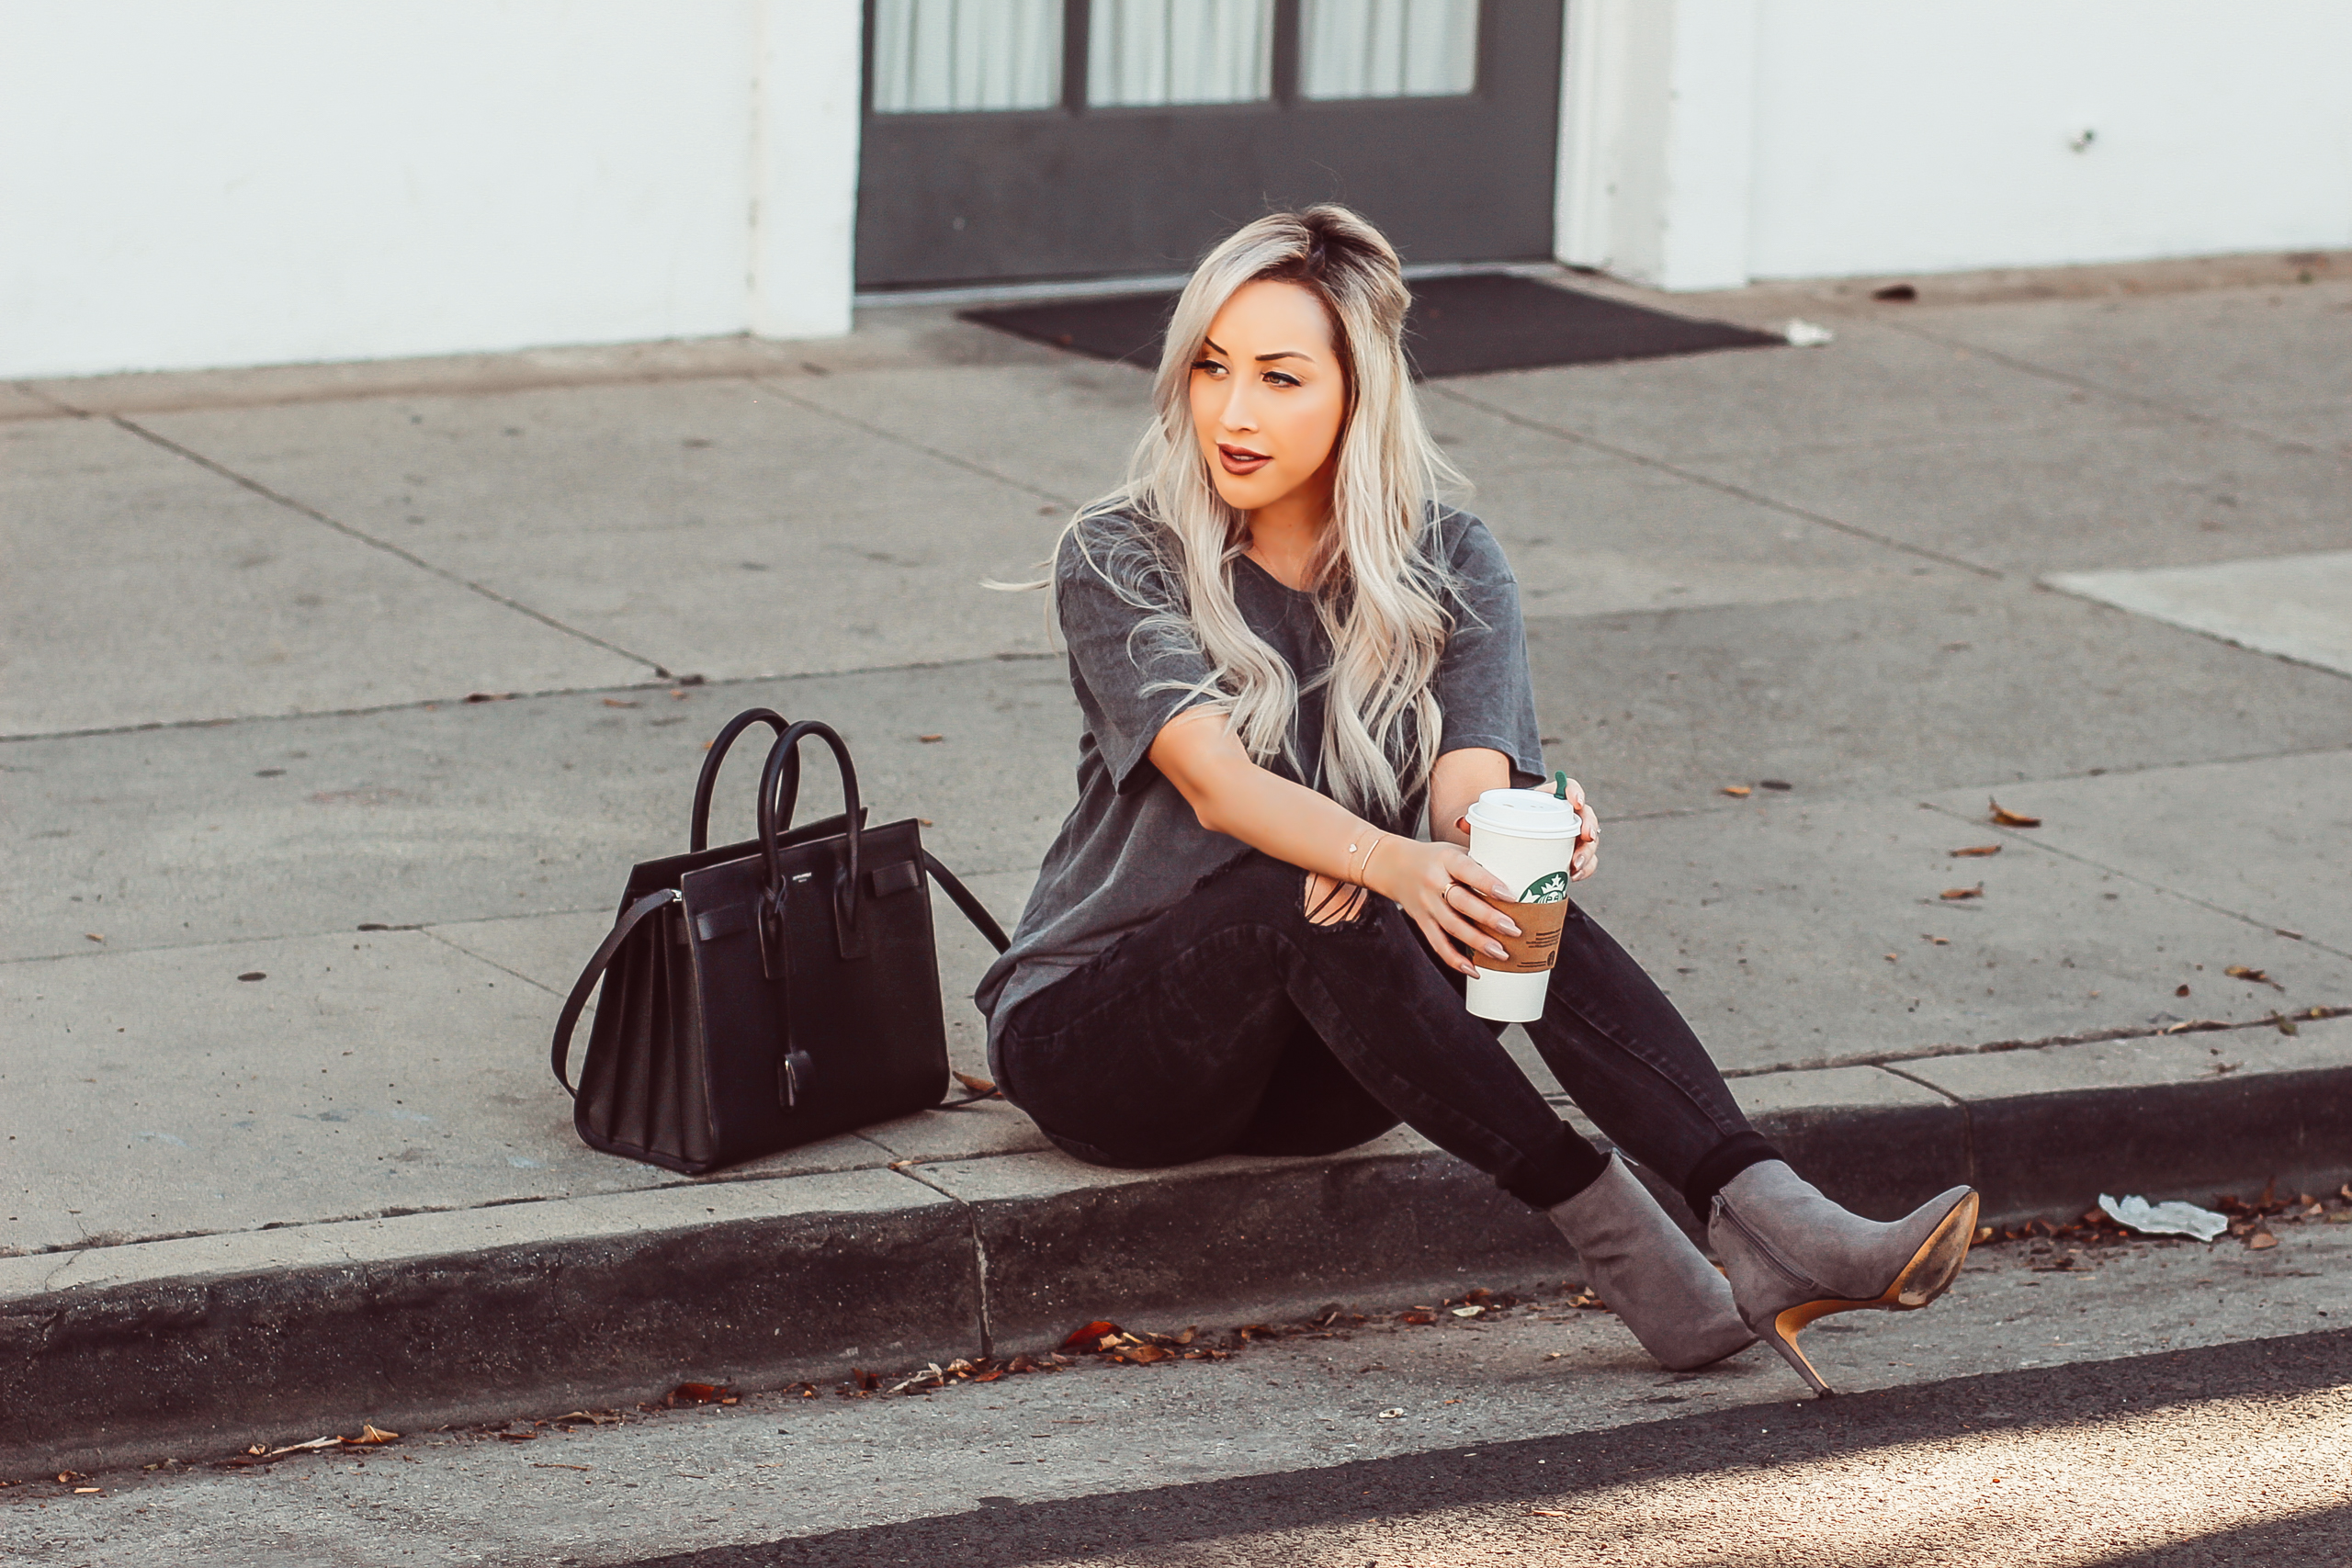 Men's Urban Outfitters Tee for an Girly/Edgy Look | Blondie in the City by Hayley Larue